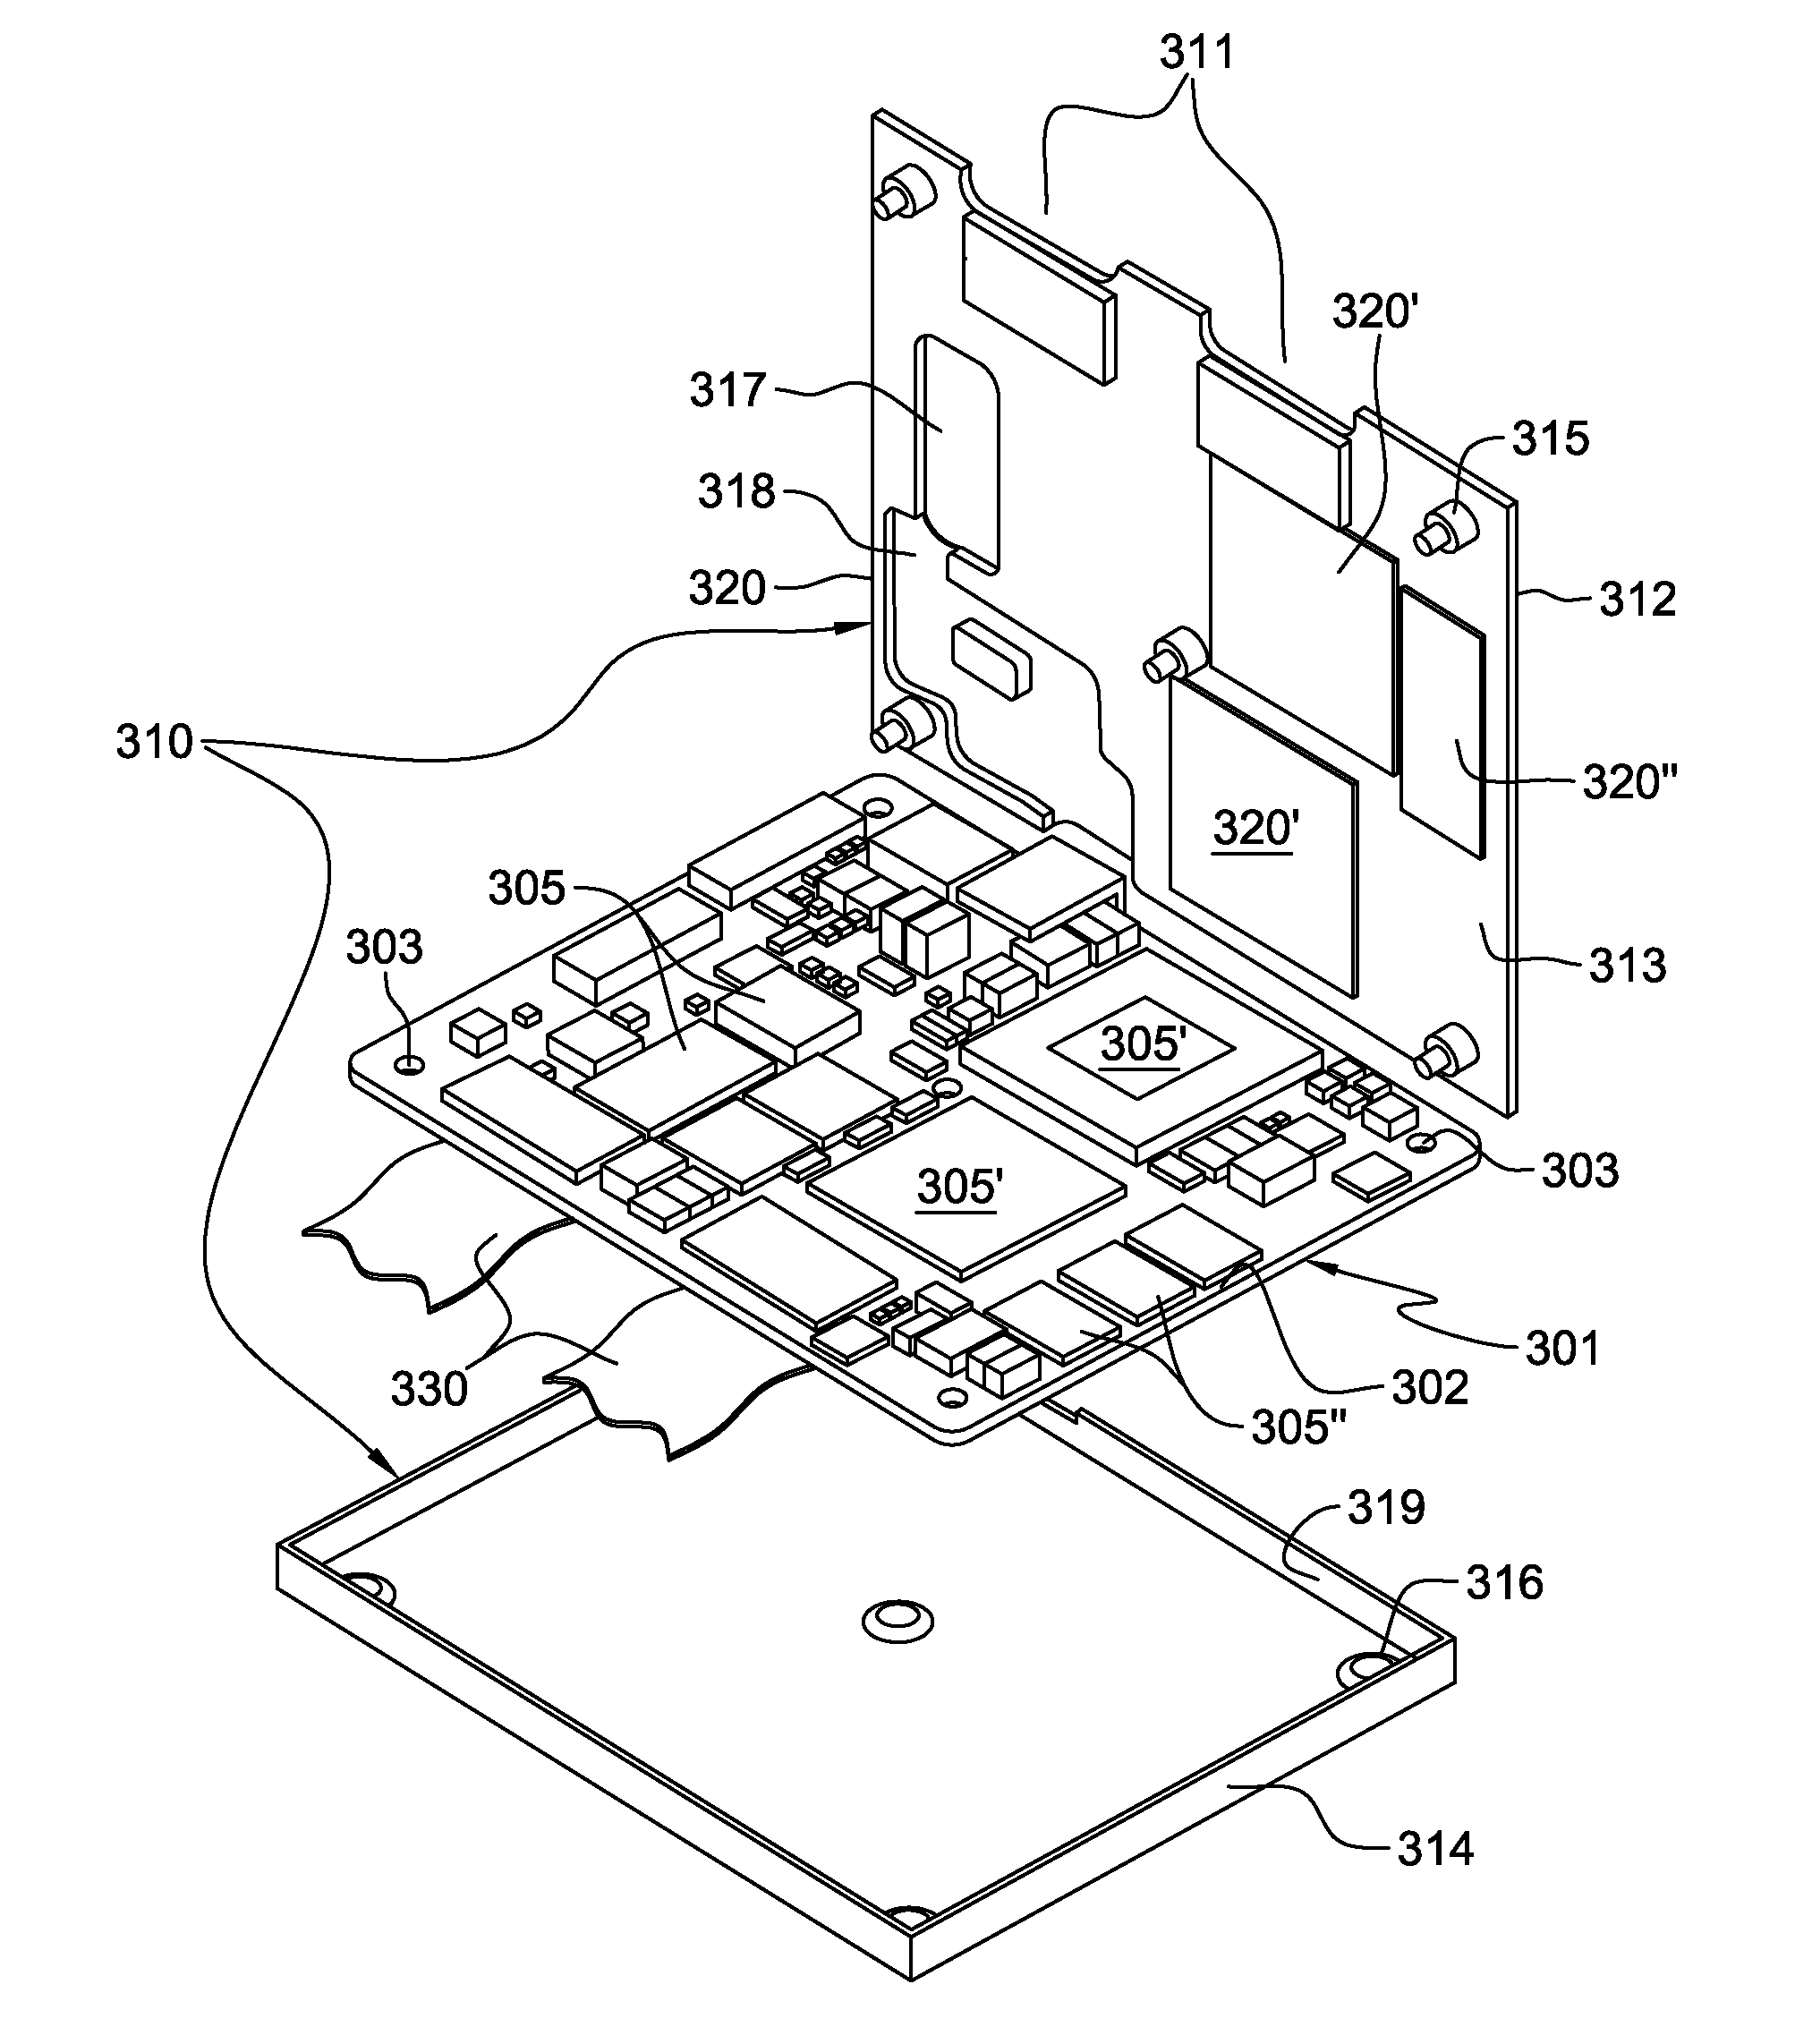 Electronic package with heat transfer element(s)